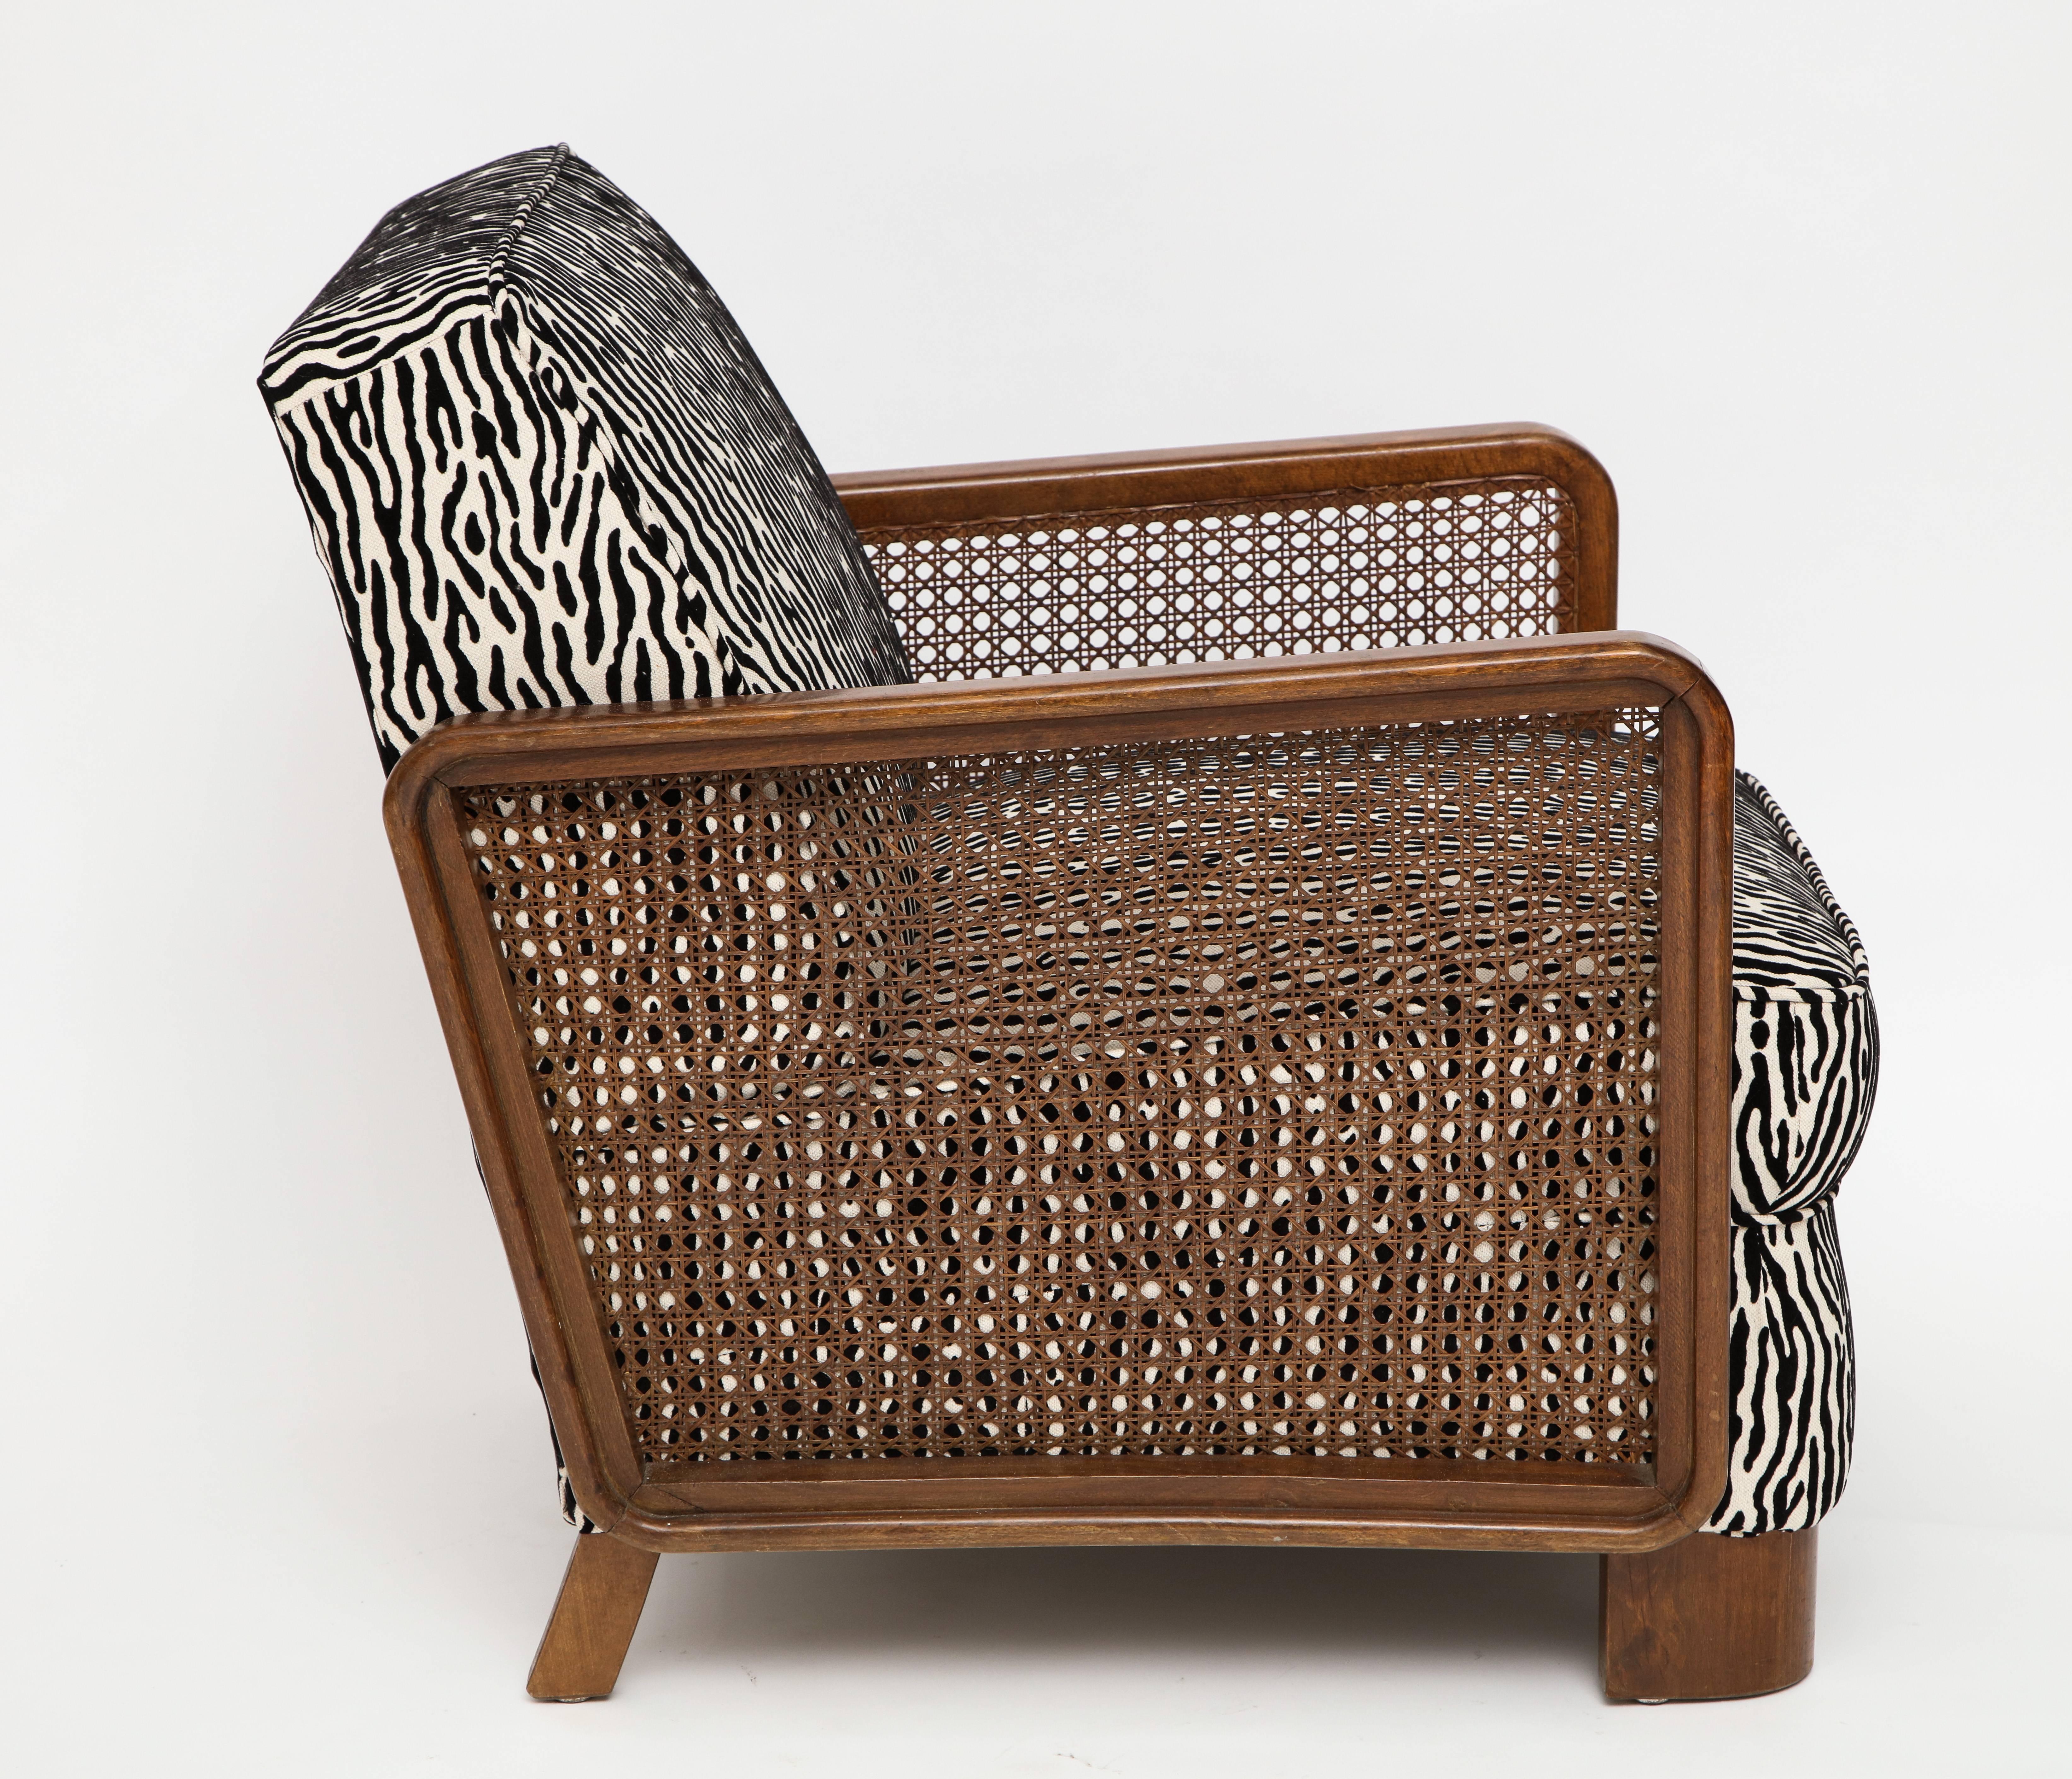 Art Deco Pair of Deco Cane Lounge Chairs Black and White Animal Print, France, 1940s